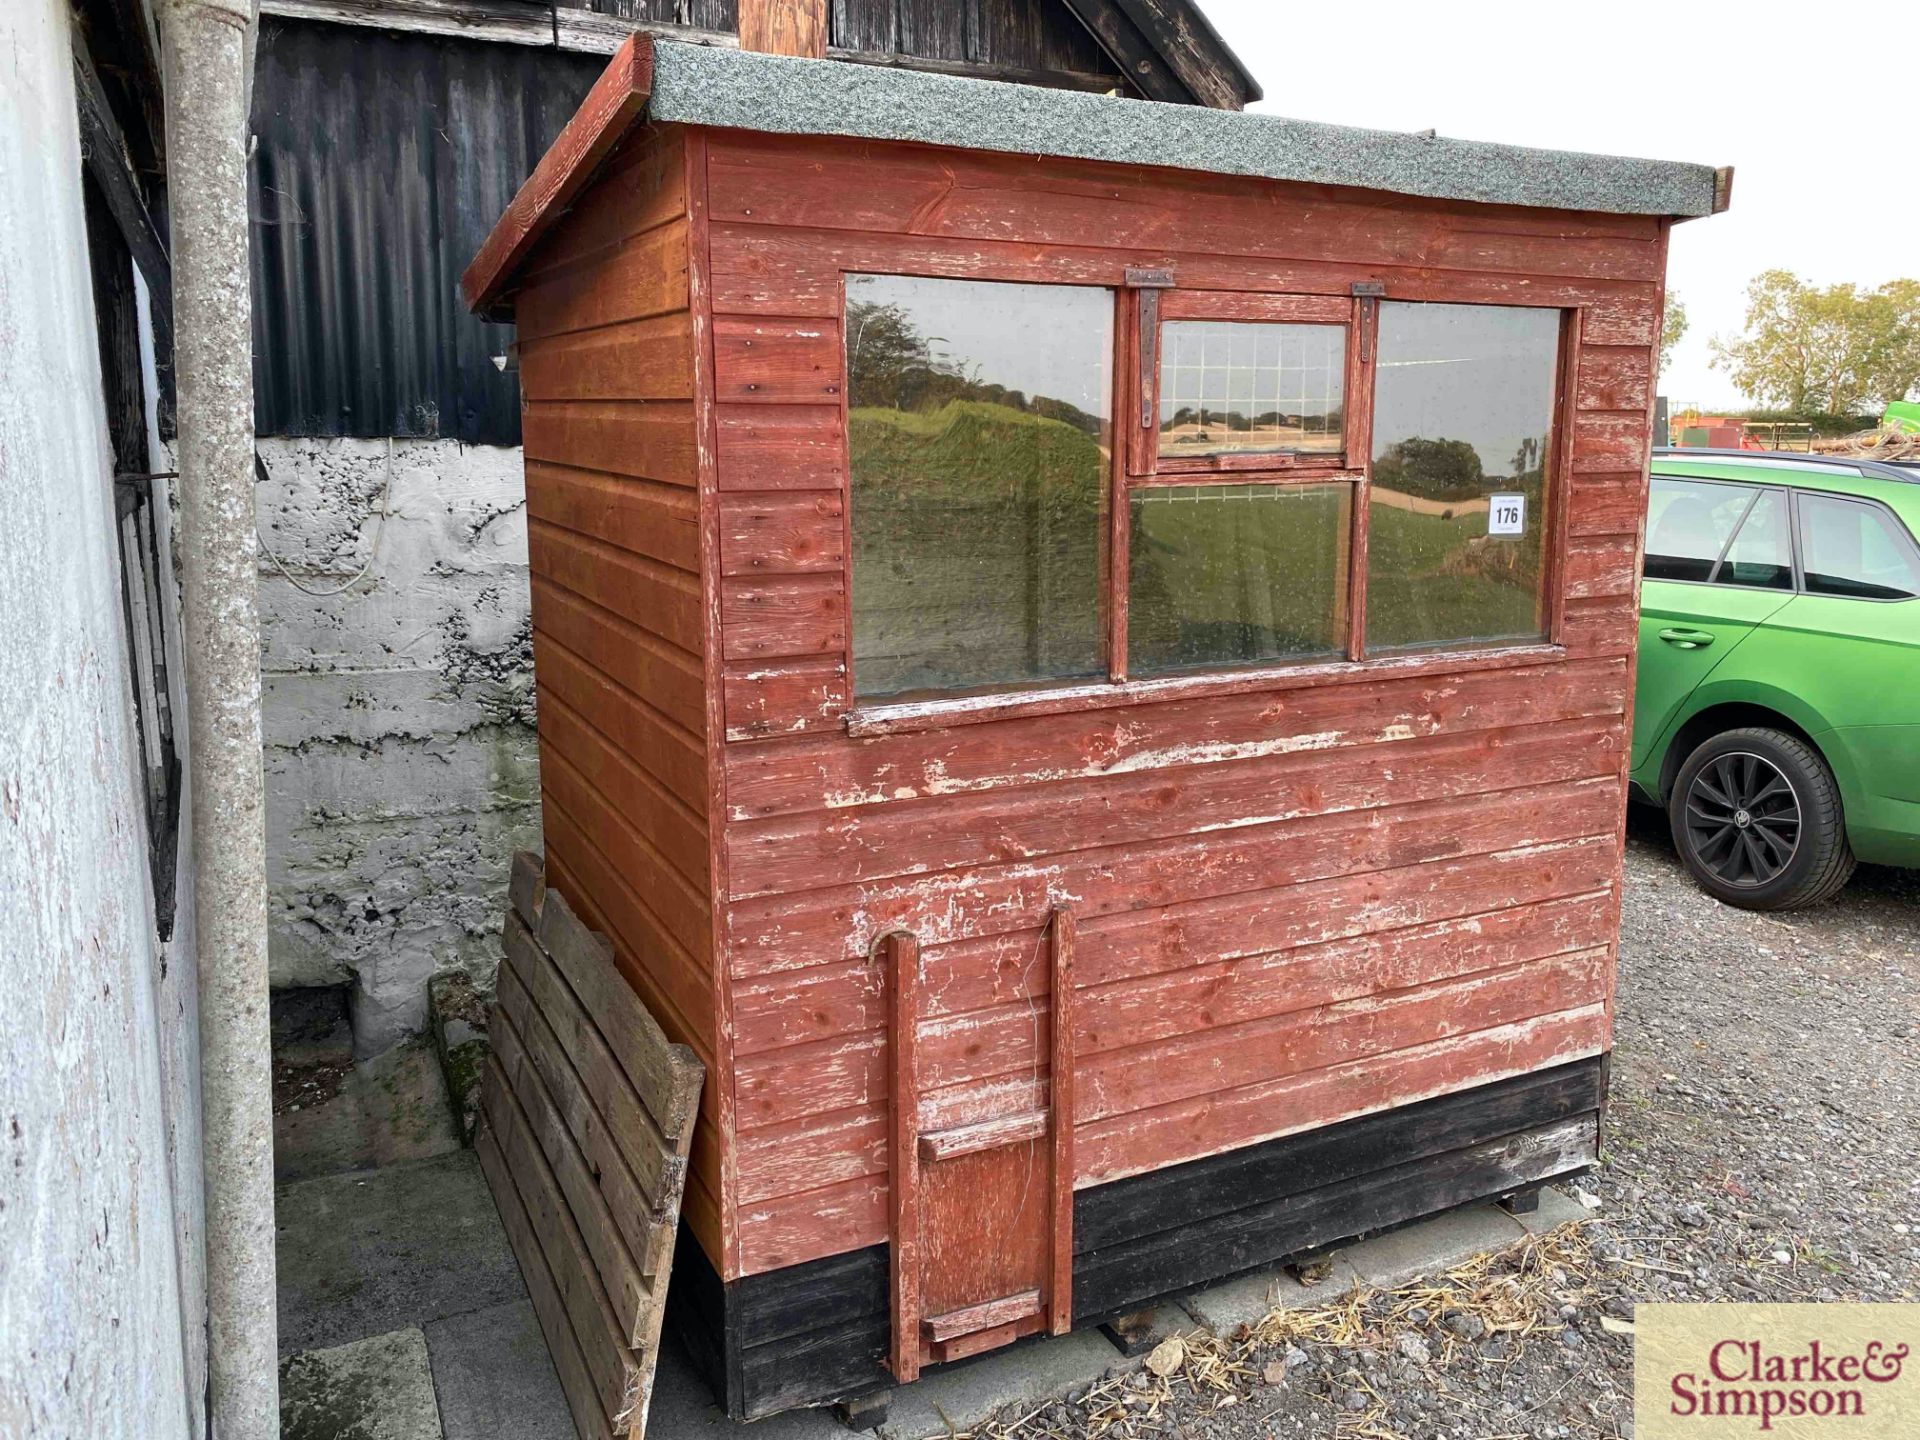 6ft x 4ft garden shed. - Image 2 of 7